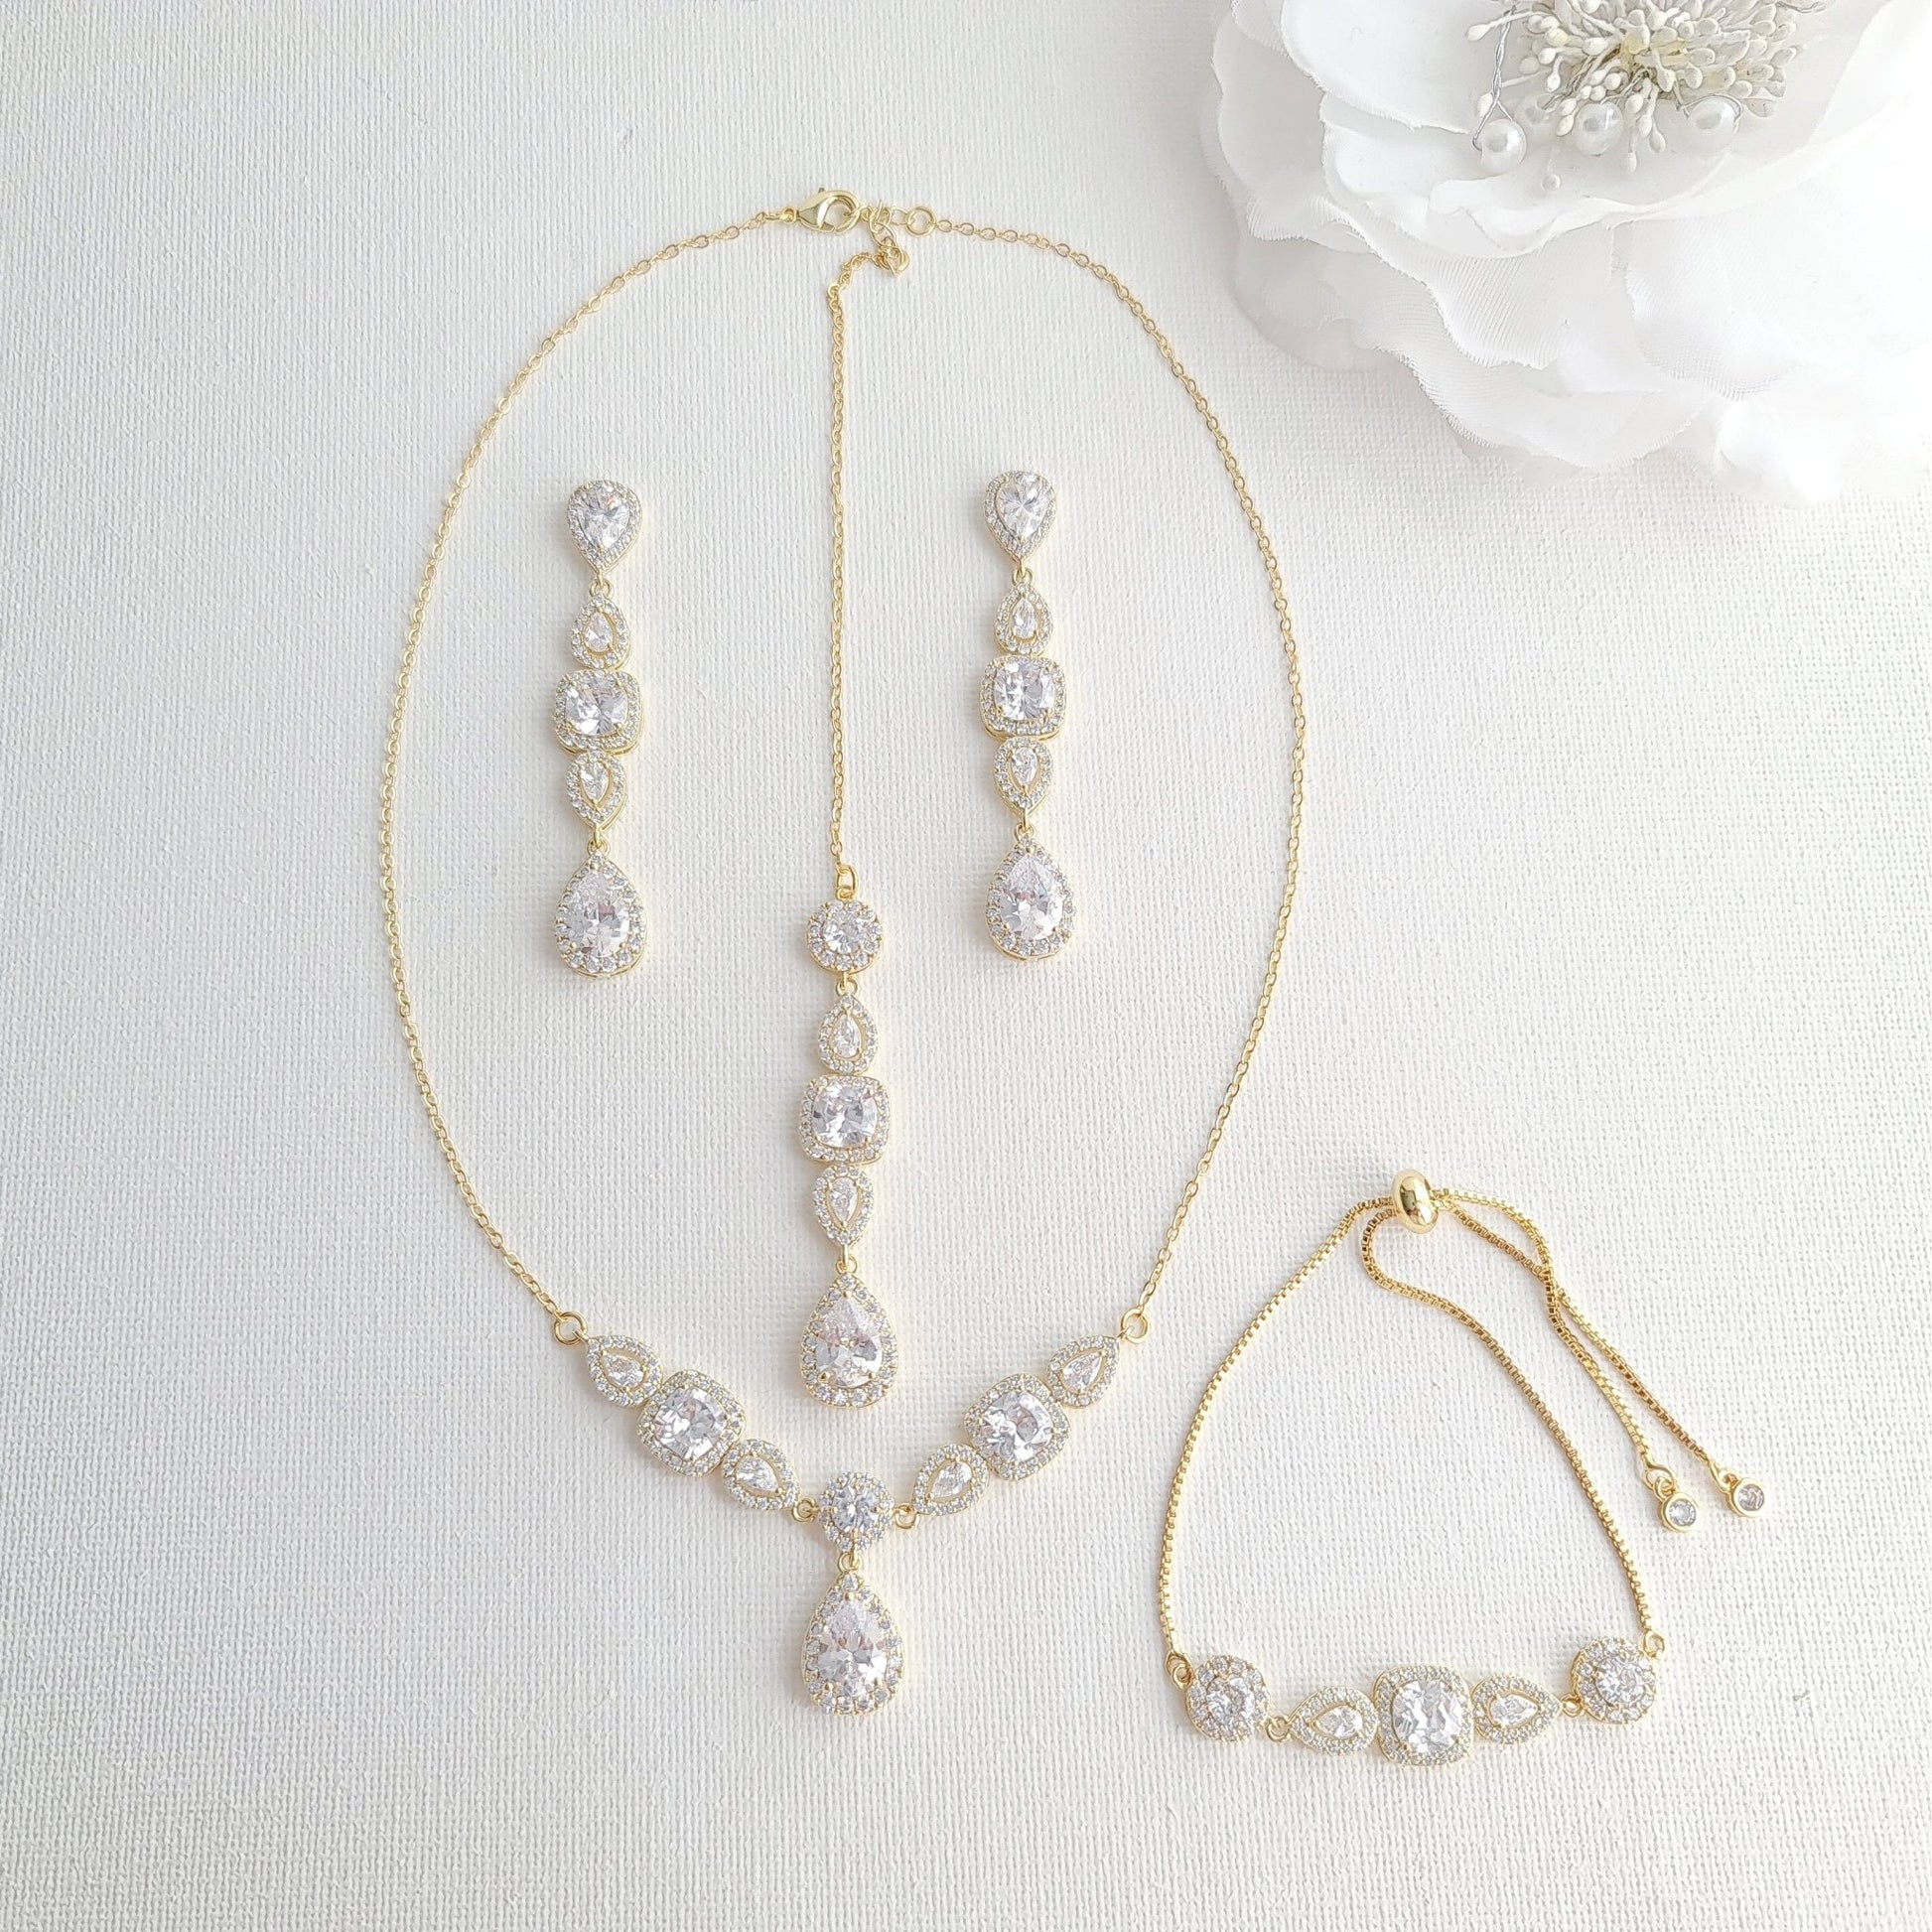 3 Piece Gold Jewelry Set For Brides-Gianna - PoetryDesigns